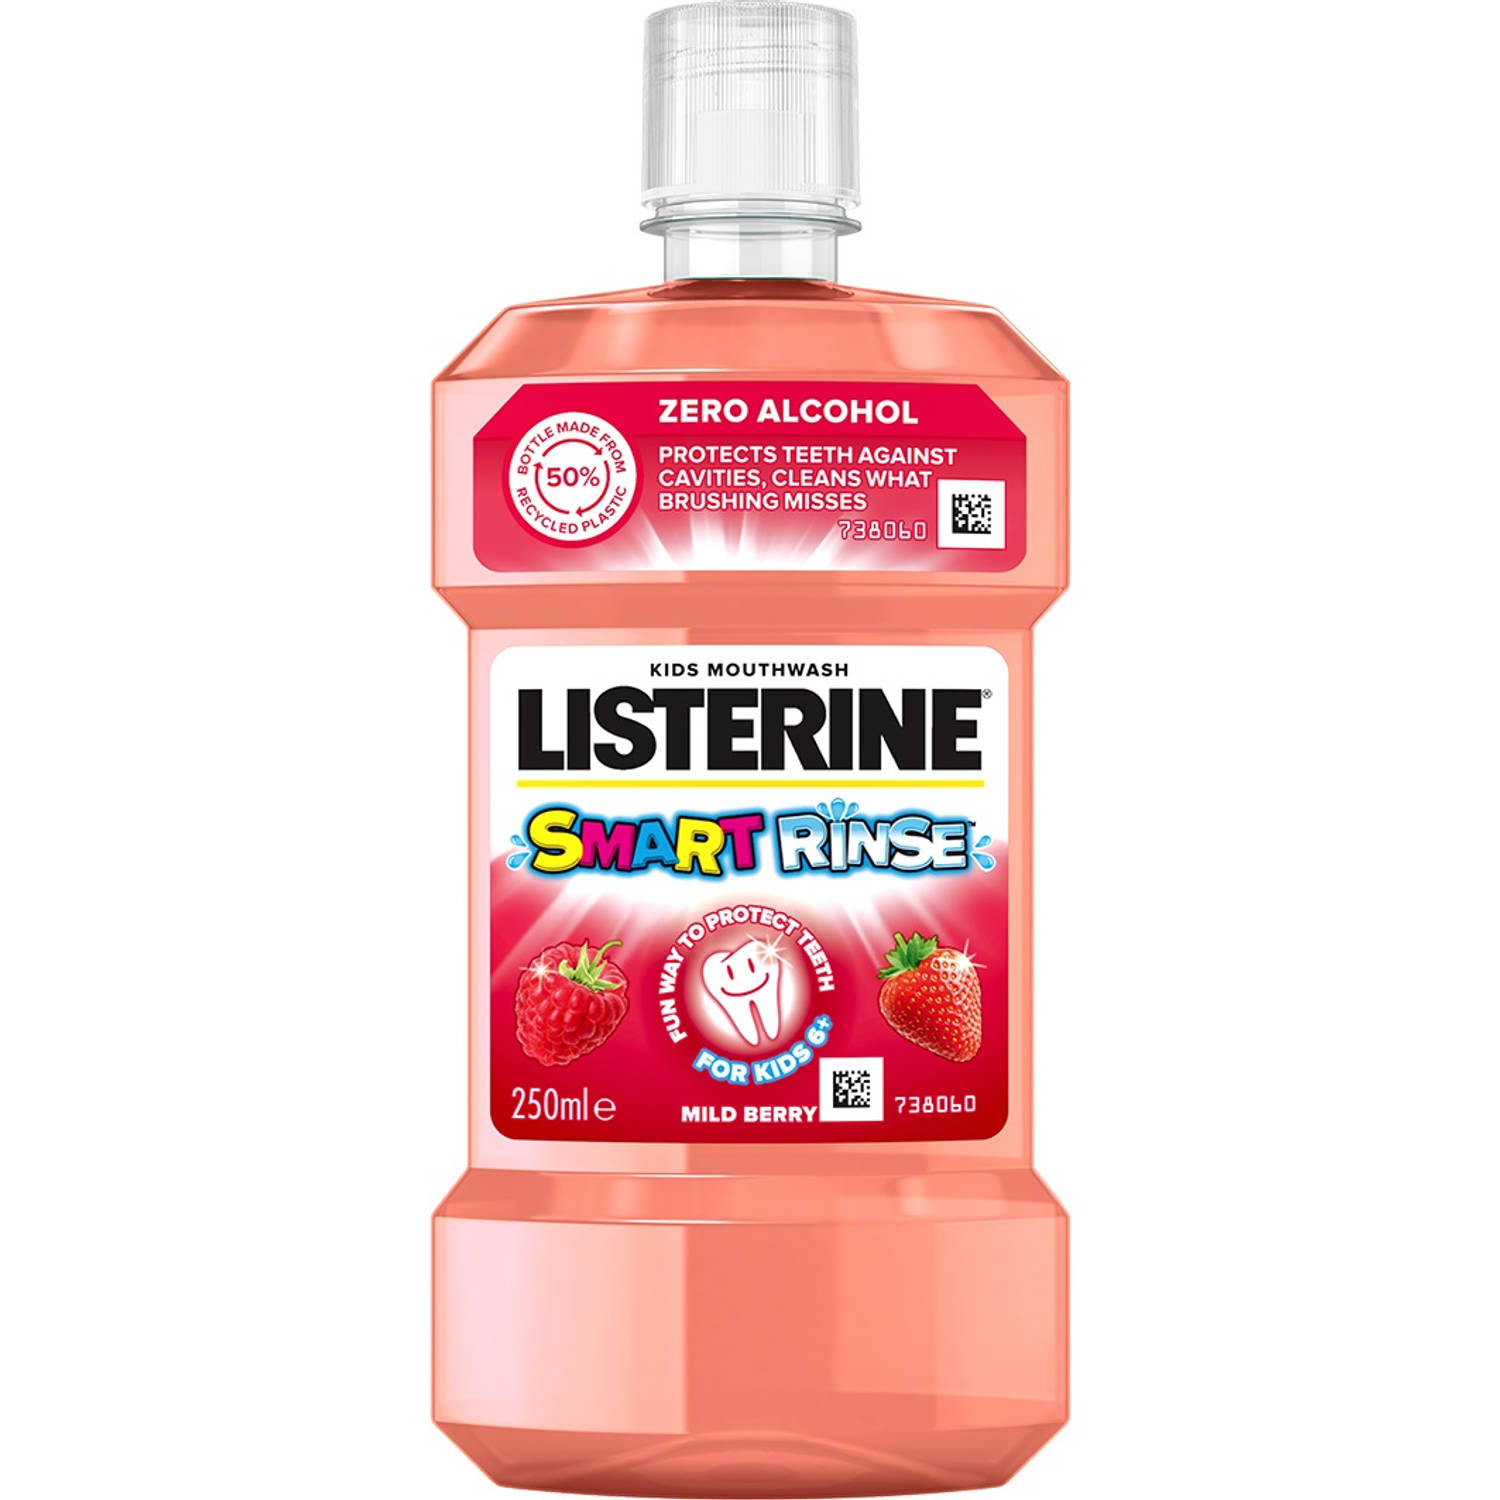 Listerine - Mouthwash for Kids Fruity Smart Rinse Berry 250 ml - 250ml